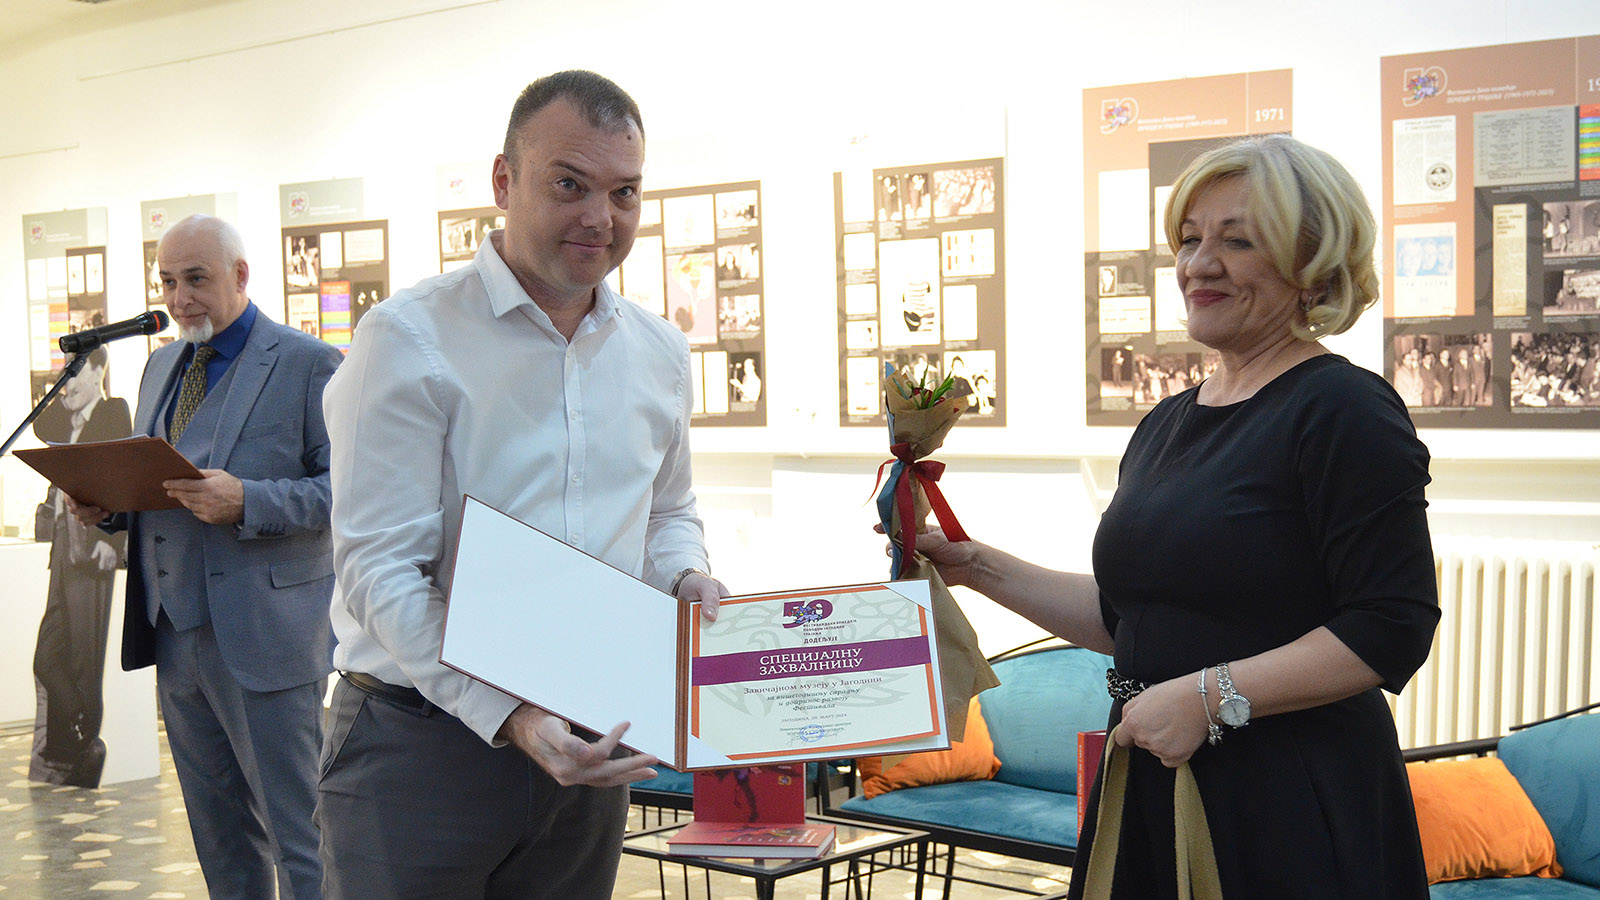 Regional Museum of Jagodina received a certificate of appreciation from the „Days of comedy“ festival